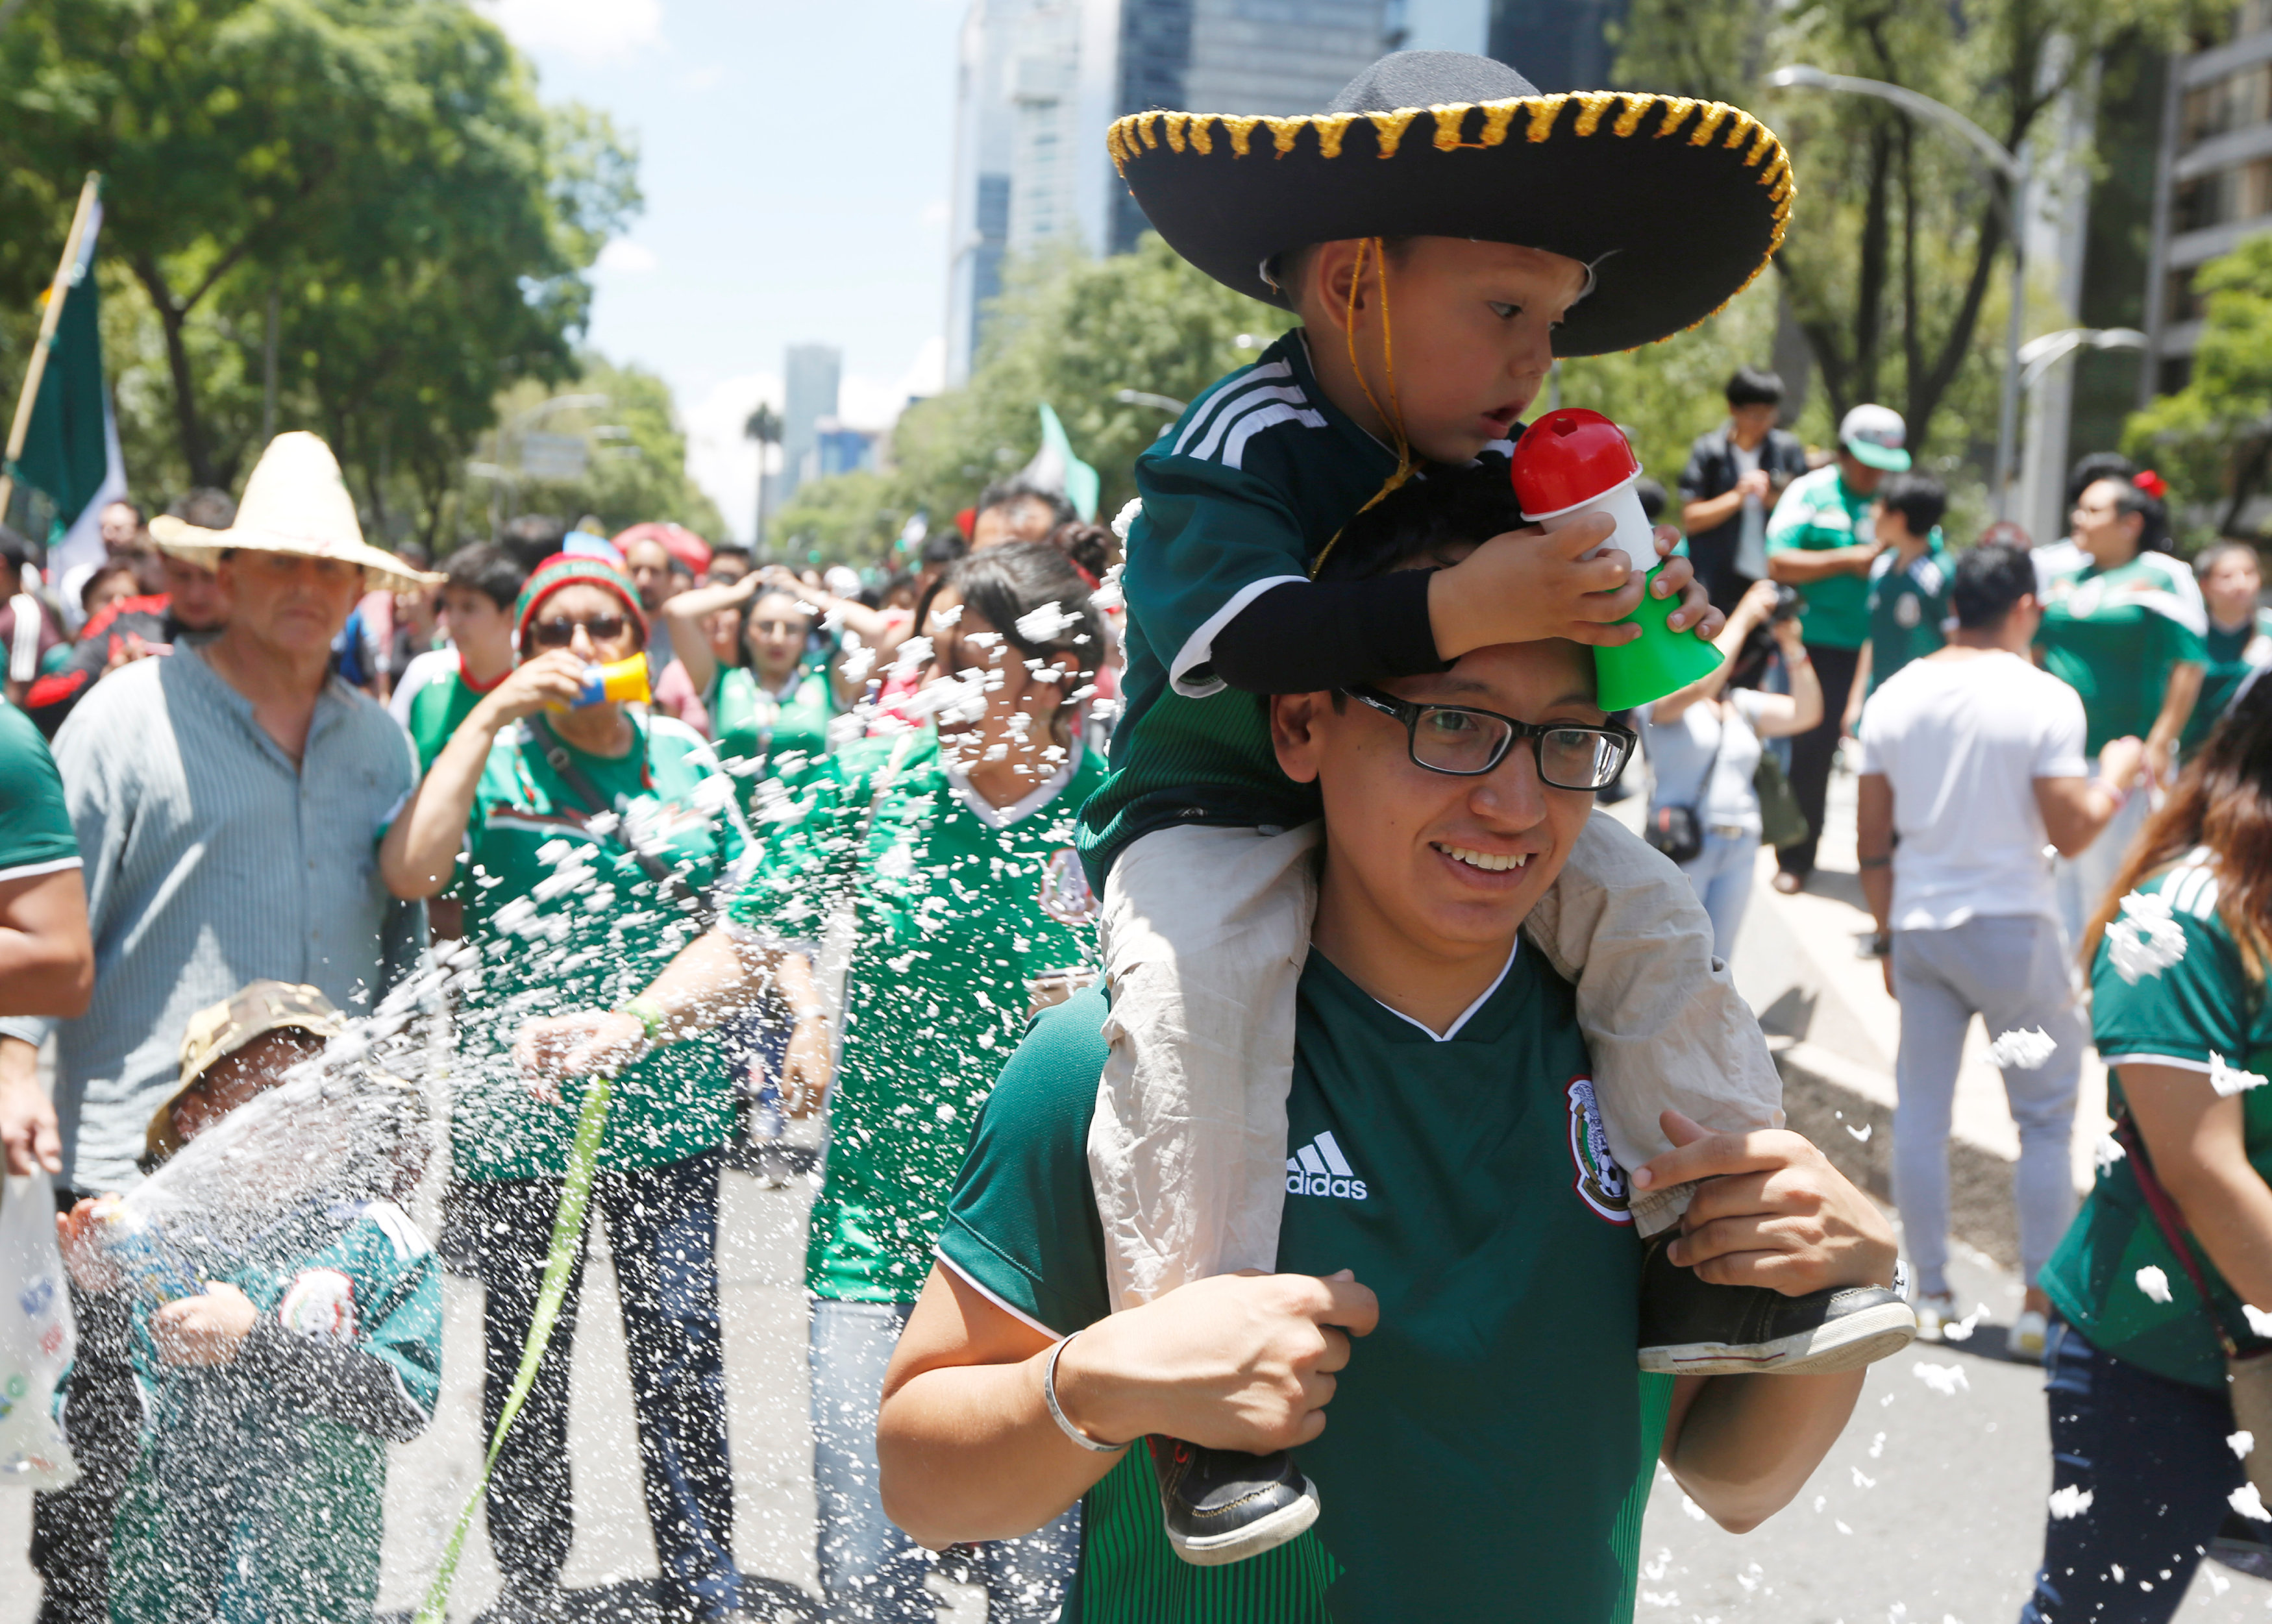 Mexicans jubilant over World Cup win trigger 'artificial' earthquake